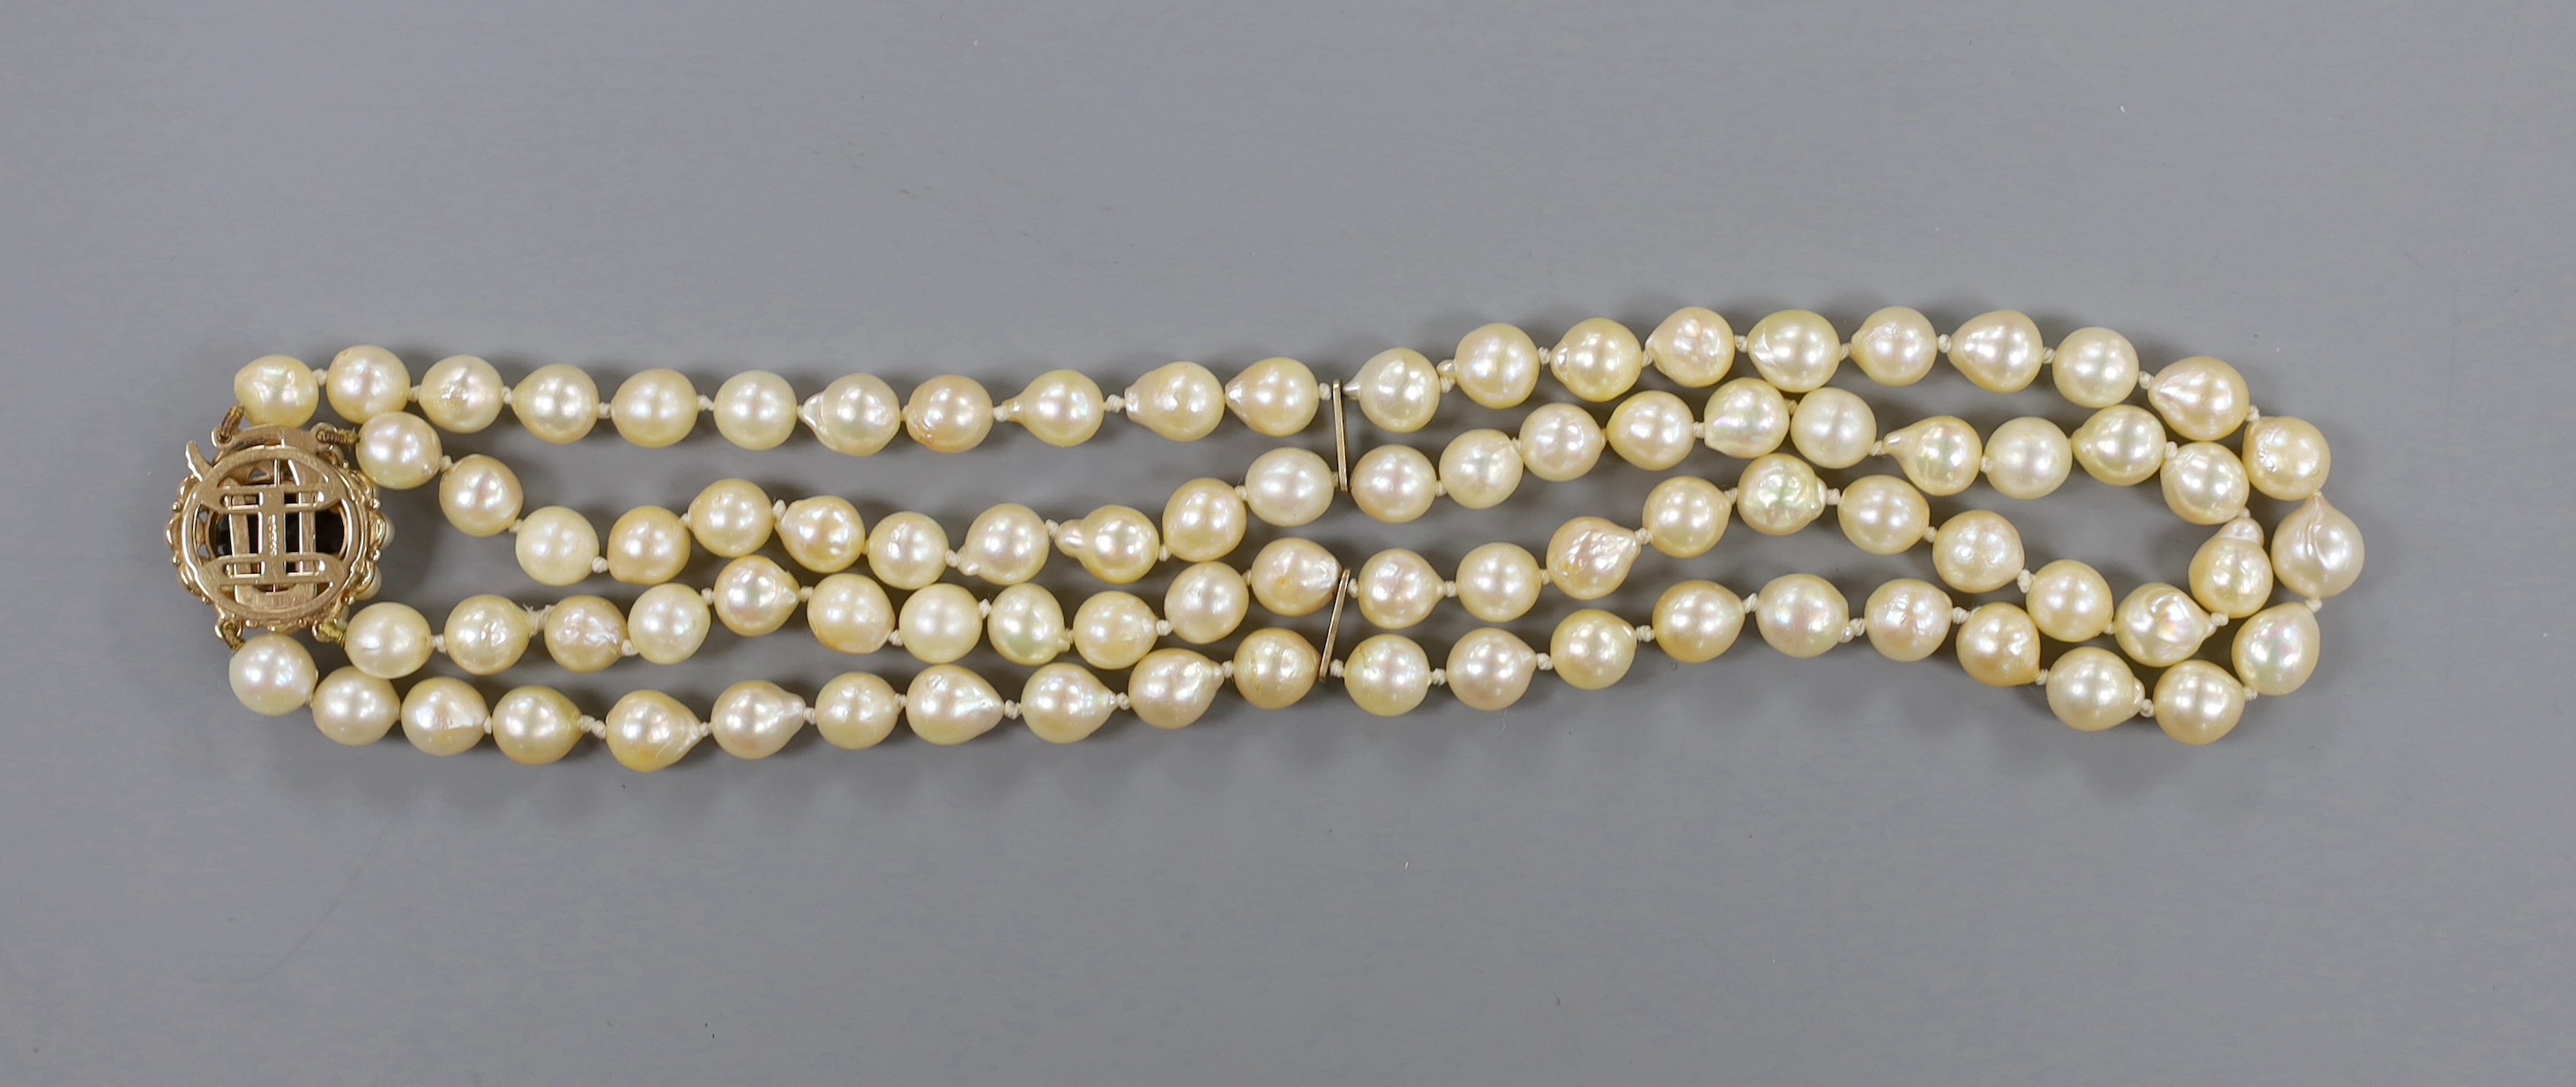 A twin strand cultured pearl necklace with a 9ct gold and garnet set clasp, 39cm.